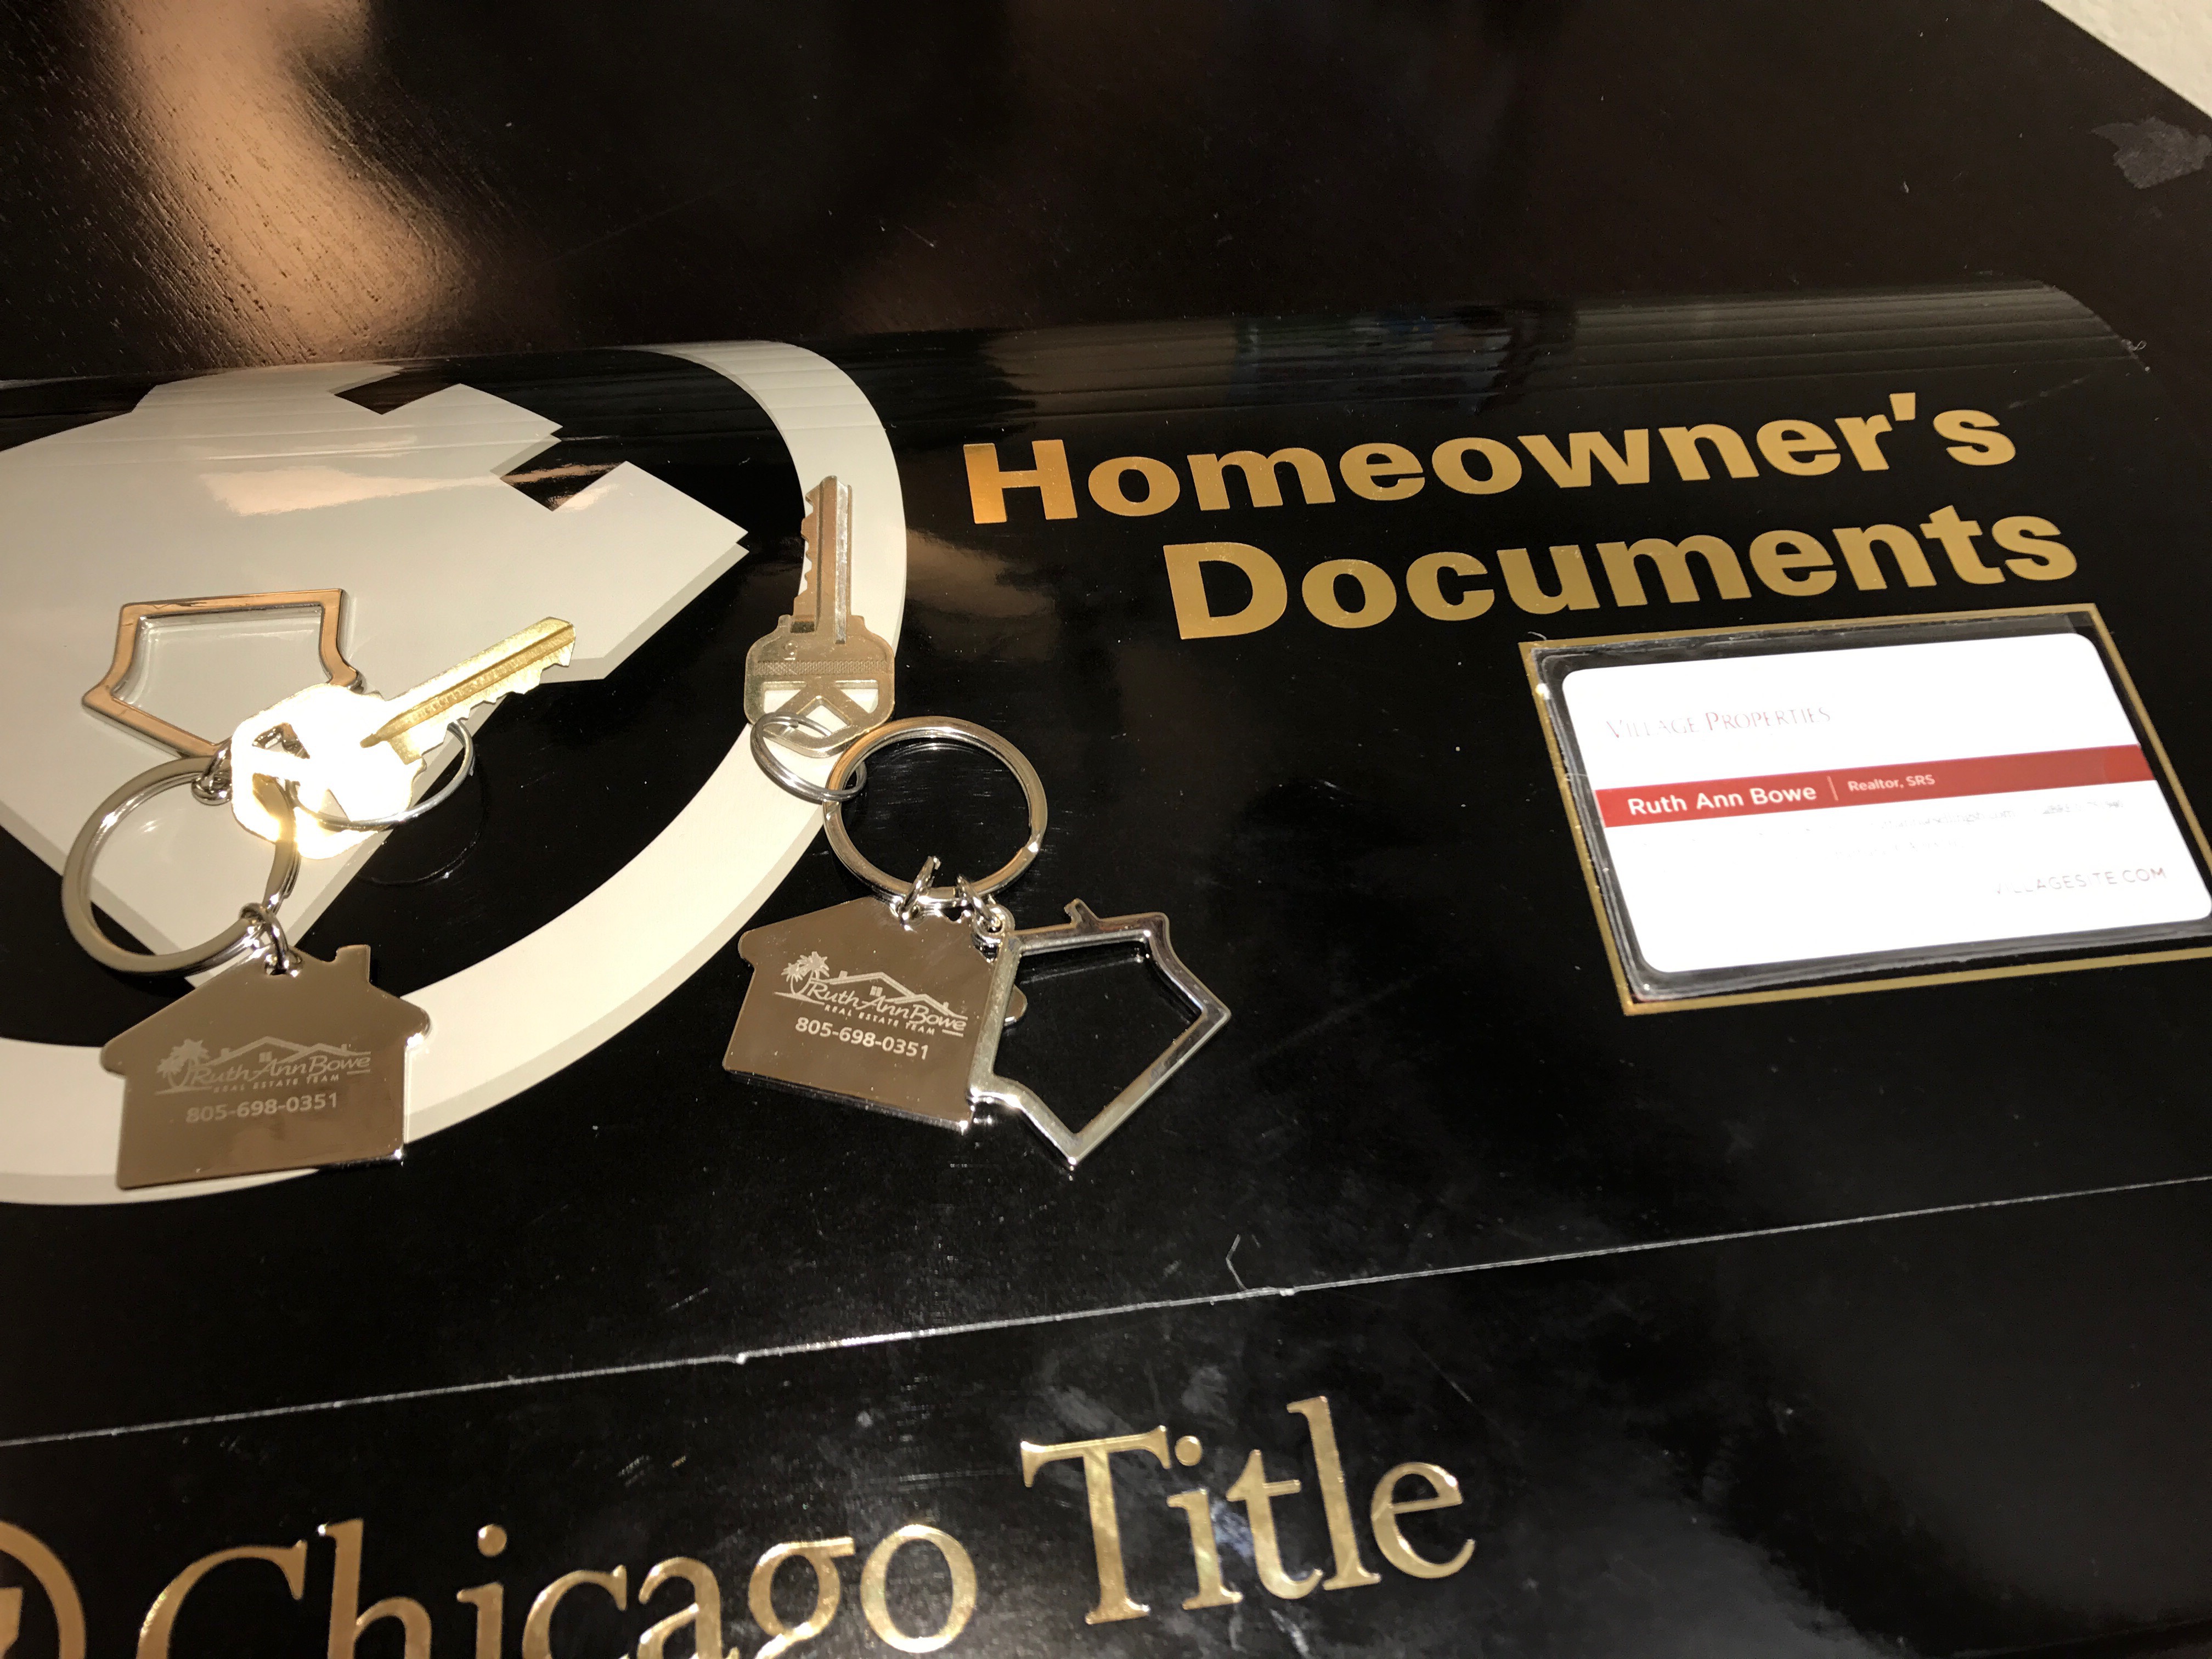 Keys to a new home along with documents folder